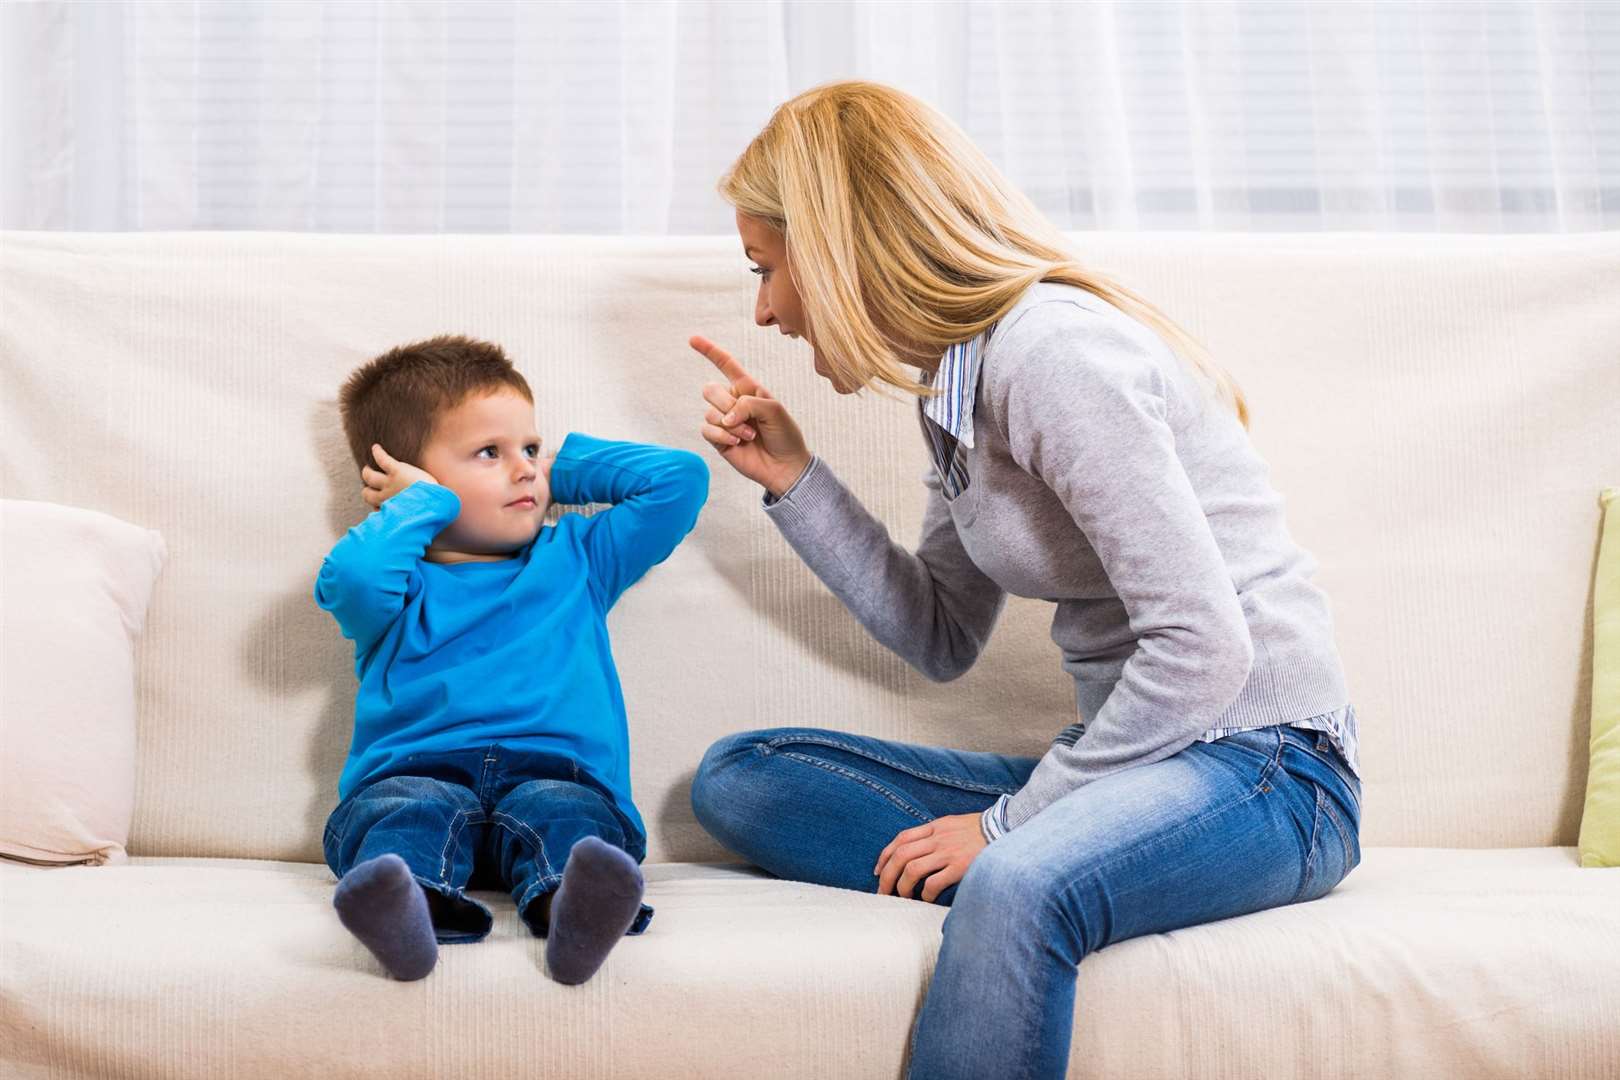 Shouting at your children rarely achieves results. Picture: iStock/PA